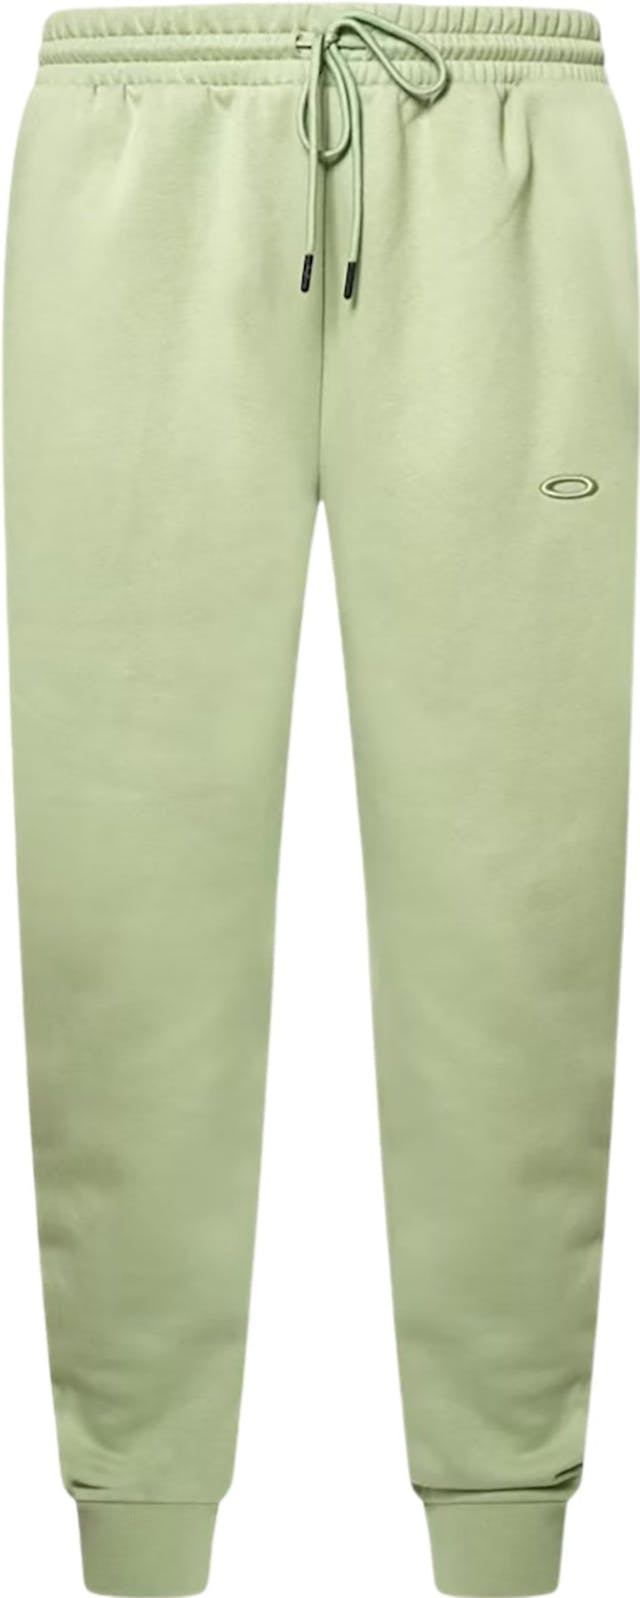 Product image for Relax 2.0 Jogger - Men's